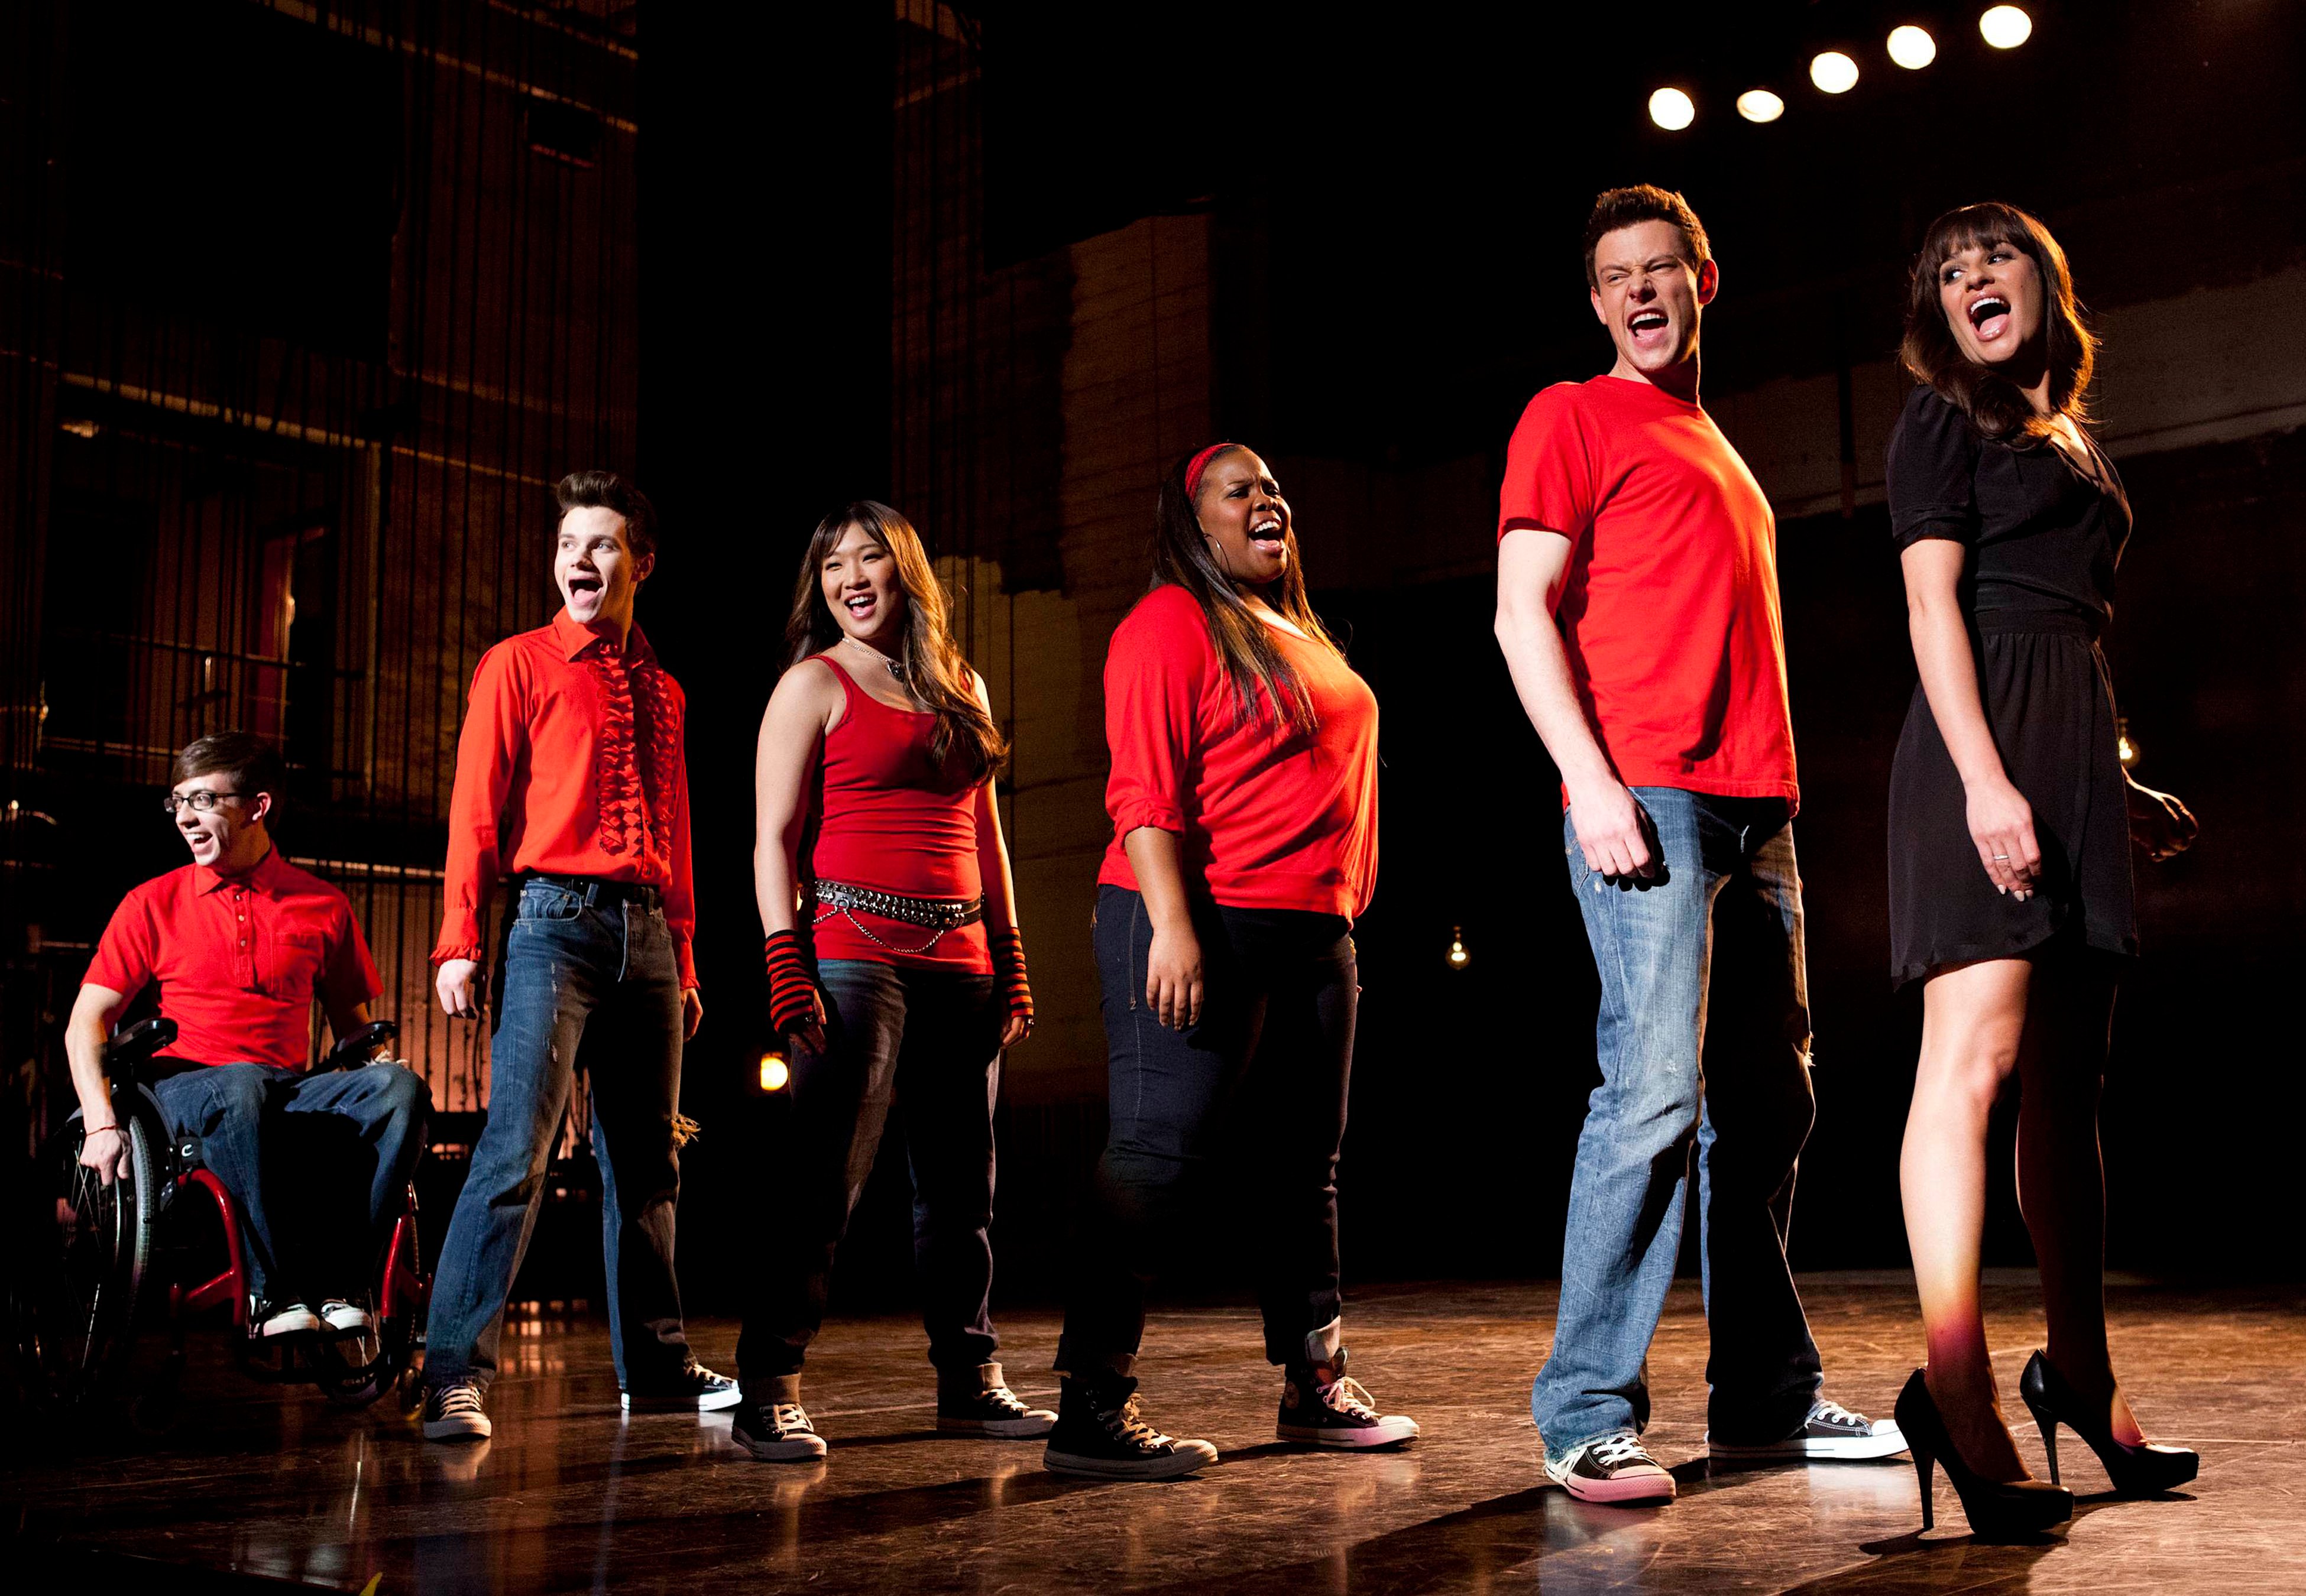 Kevin McHale, Chris Colfer, Jenna Ushkowitz, Amber Riley, Cory Monteith, and Lea Michele, in character as Artie, Kurt, Tina, Mercedes, Finn, and Rachel, share a scene in 'Glee' Season 4, which is now on Hulu and Disney+. The characters in the photo stand in a line onstage and sing.